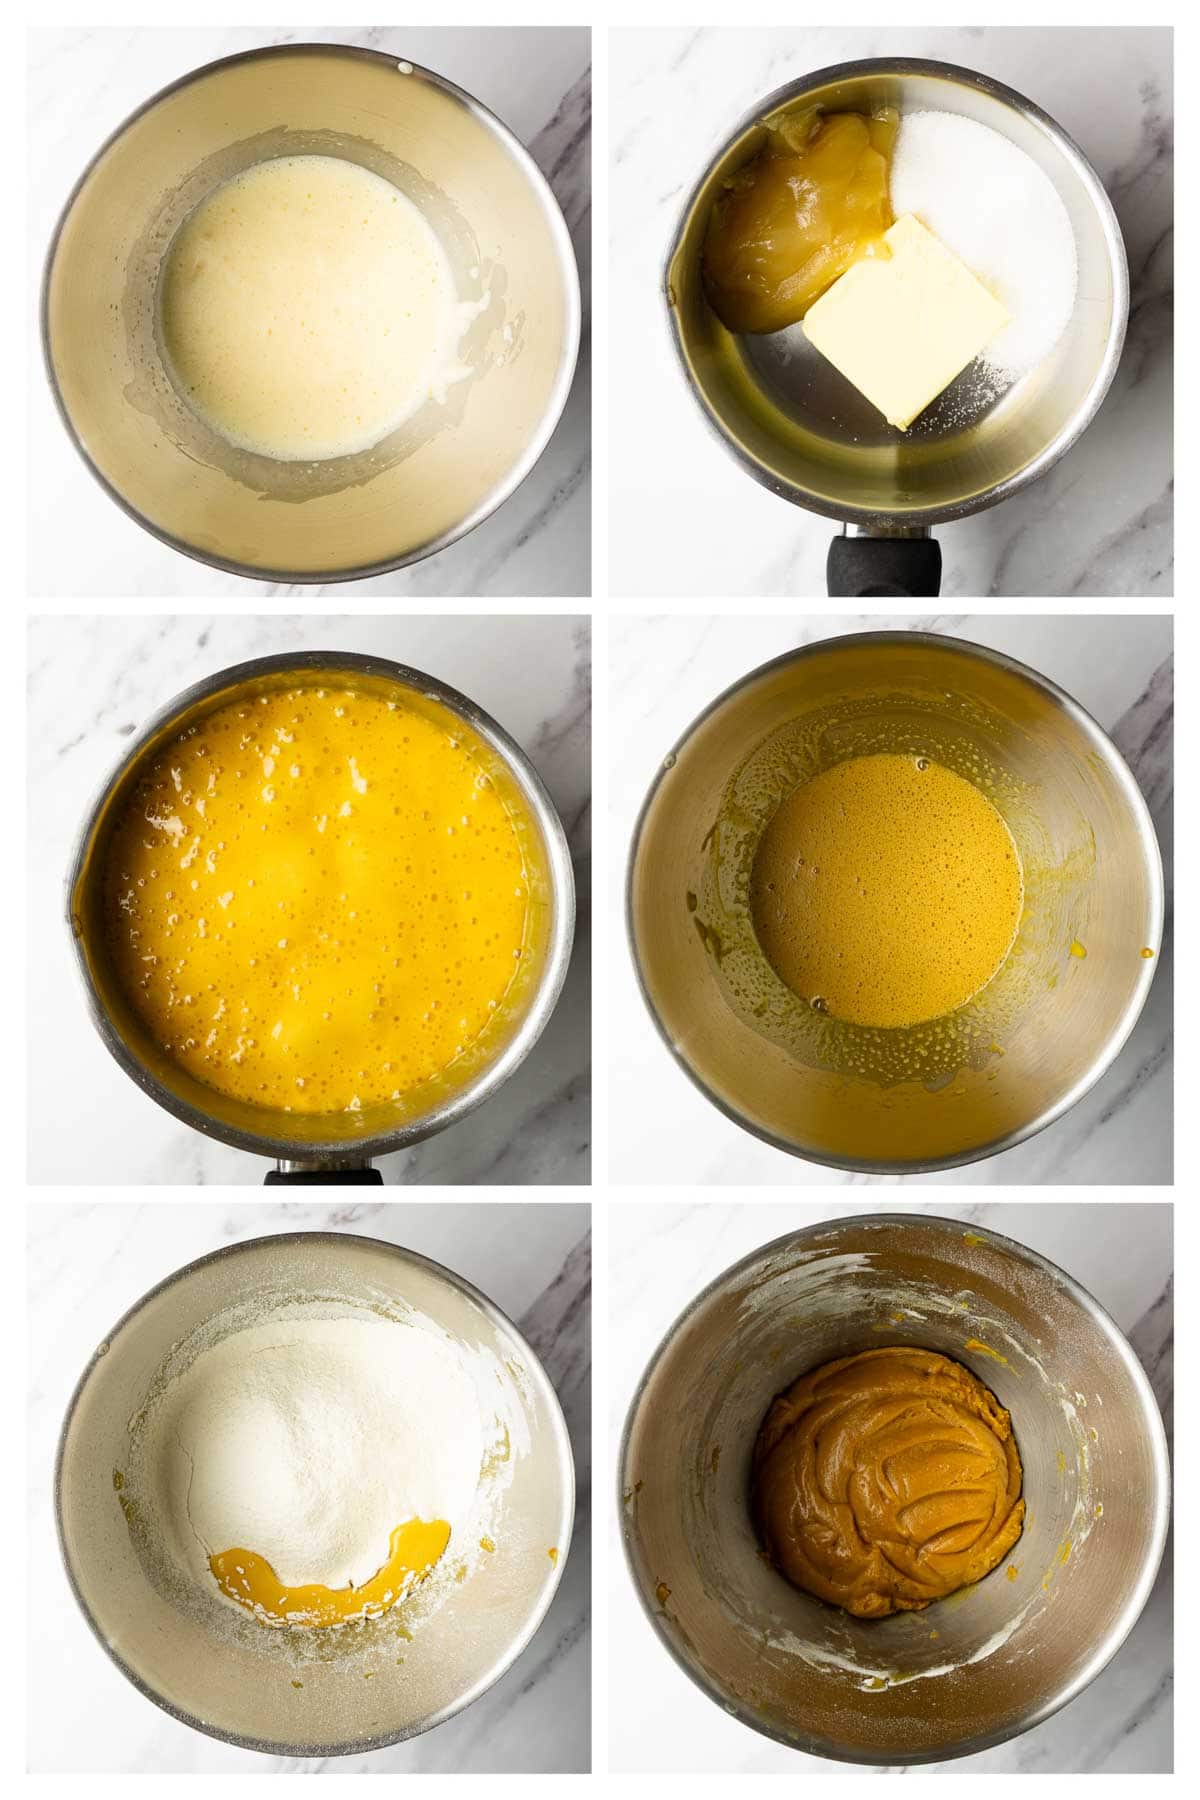 Collage image showing step by step instructions to make dough for honey cake.